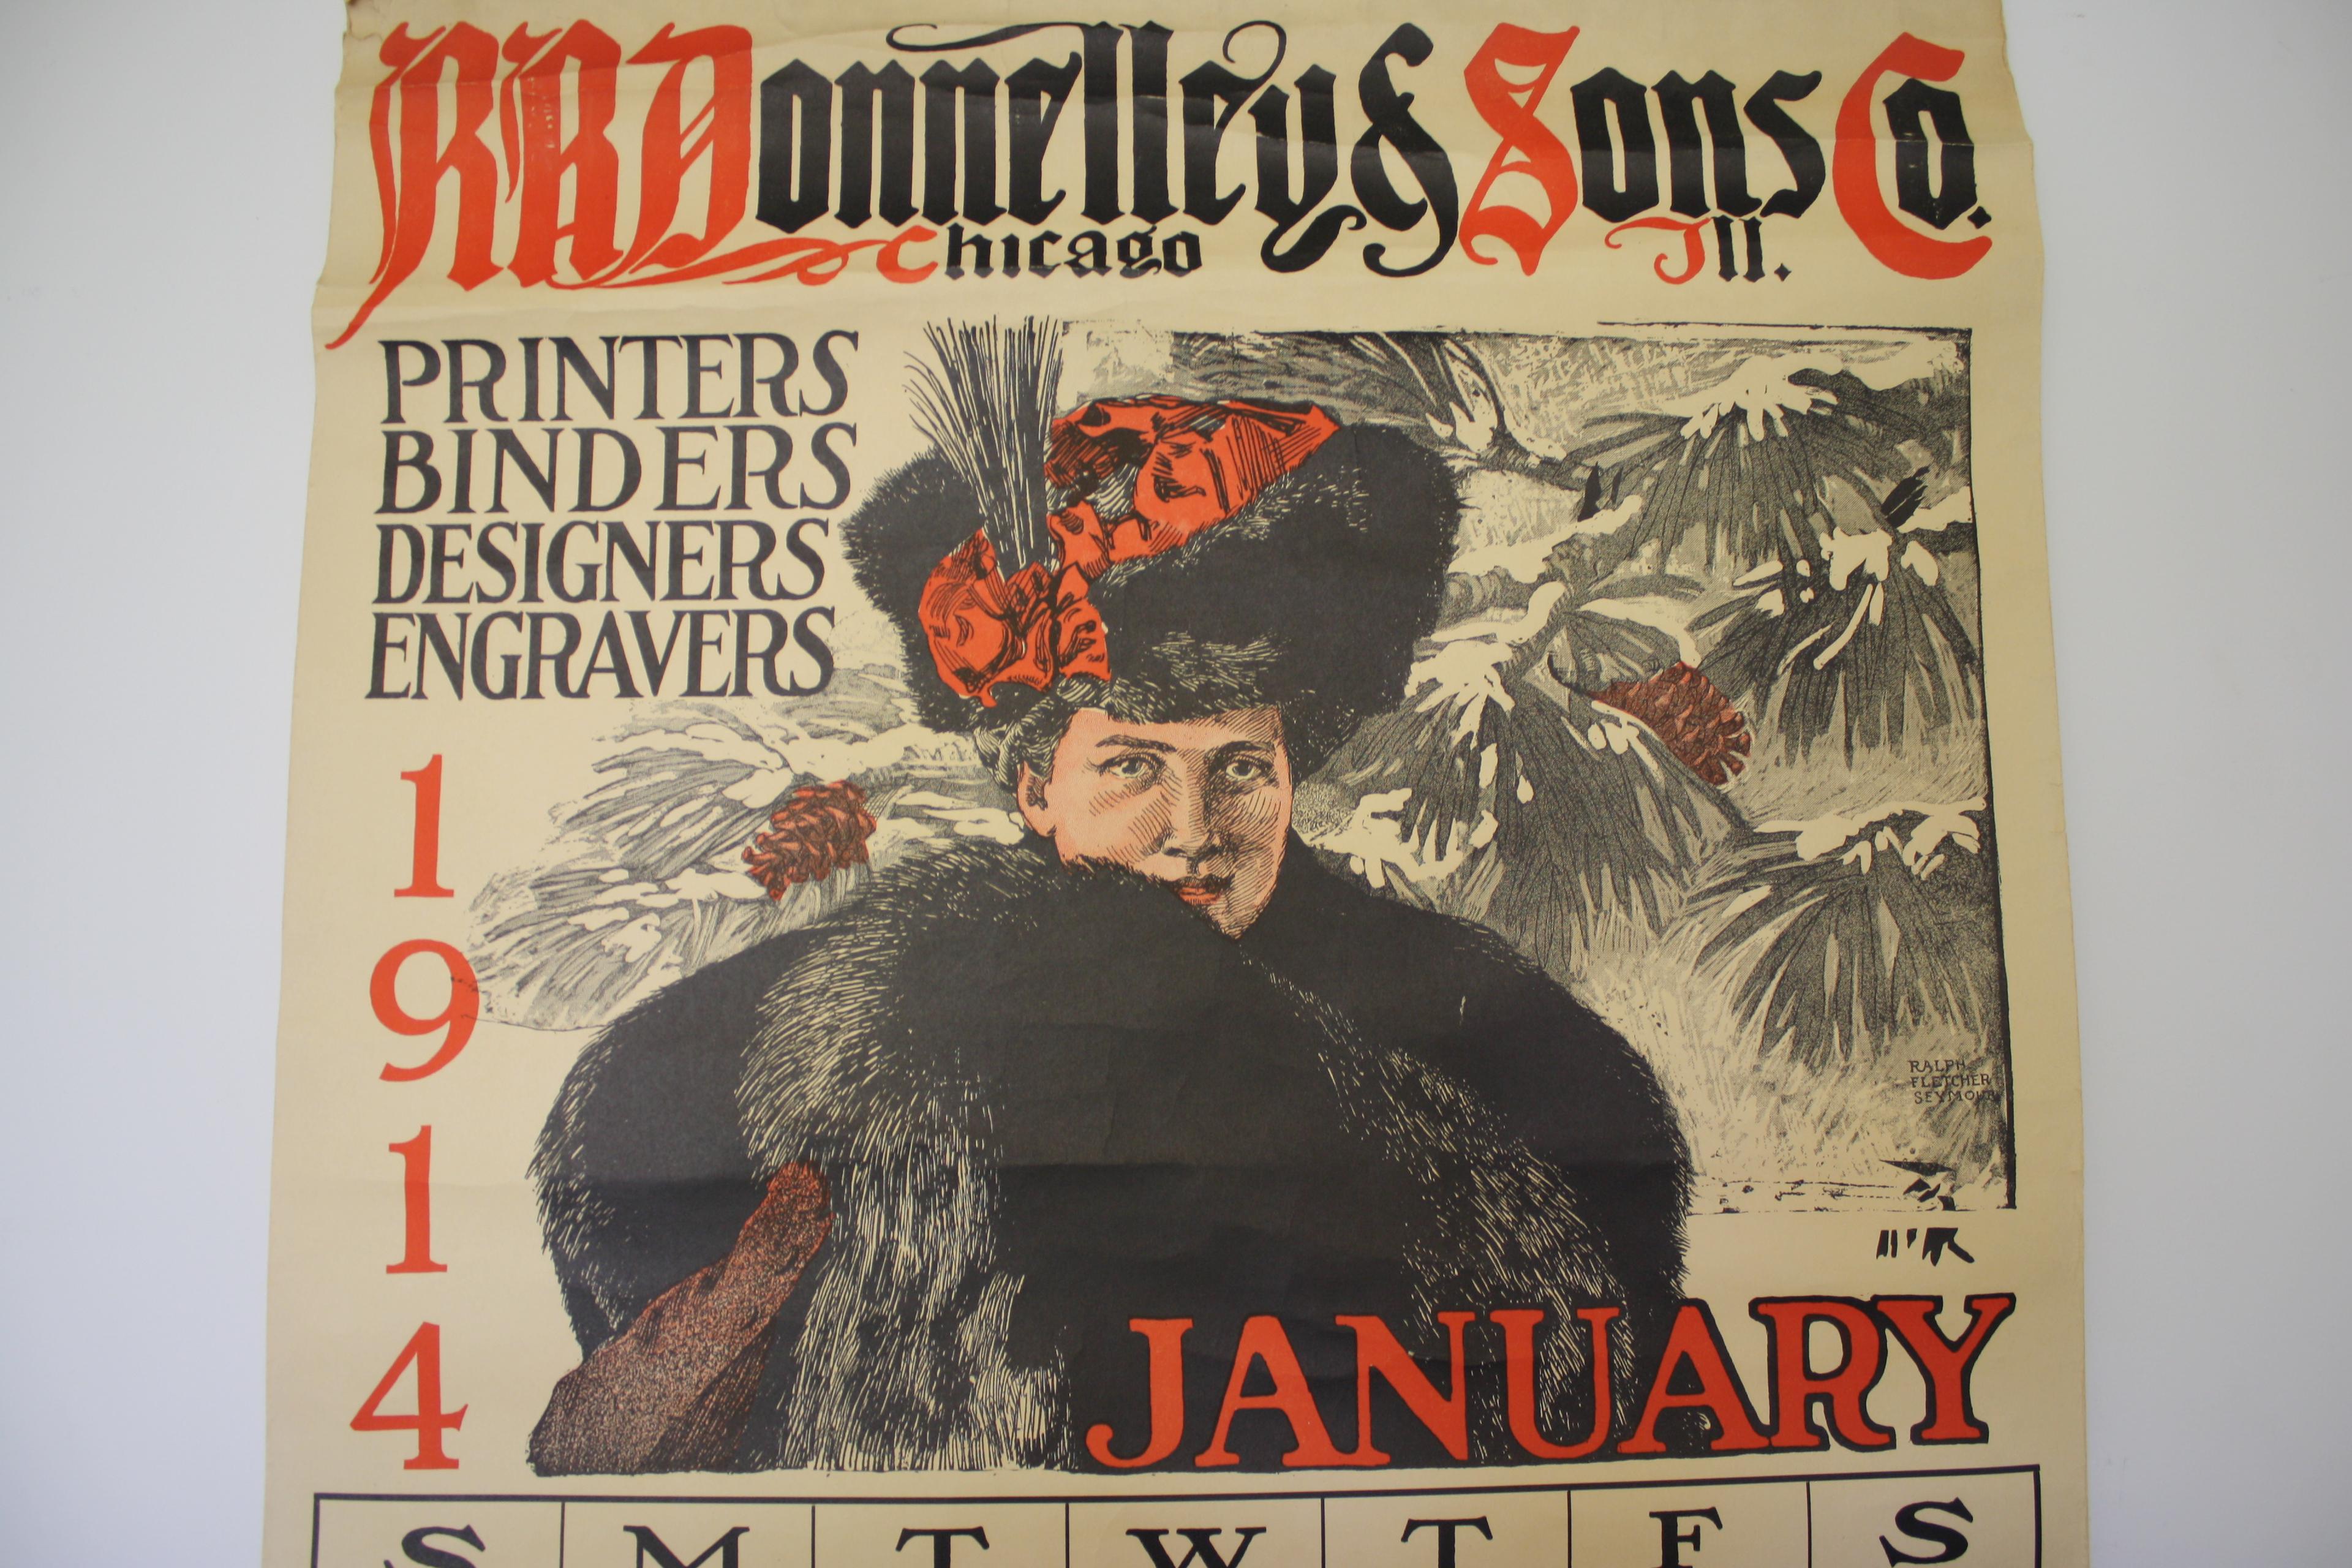 1914 RR Donnelly & Sons Co. Calendar